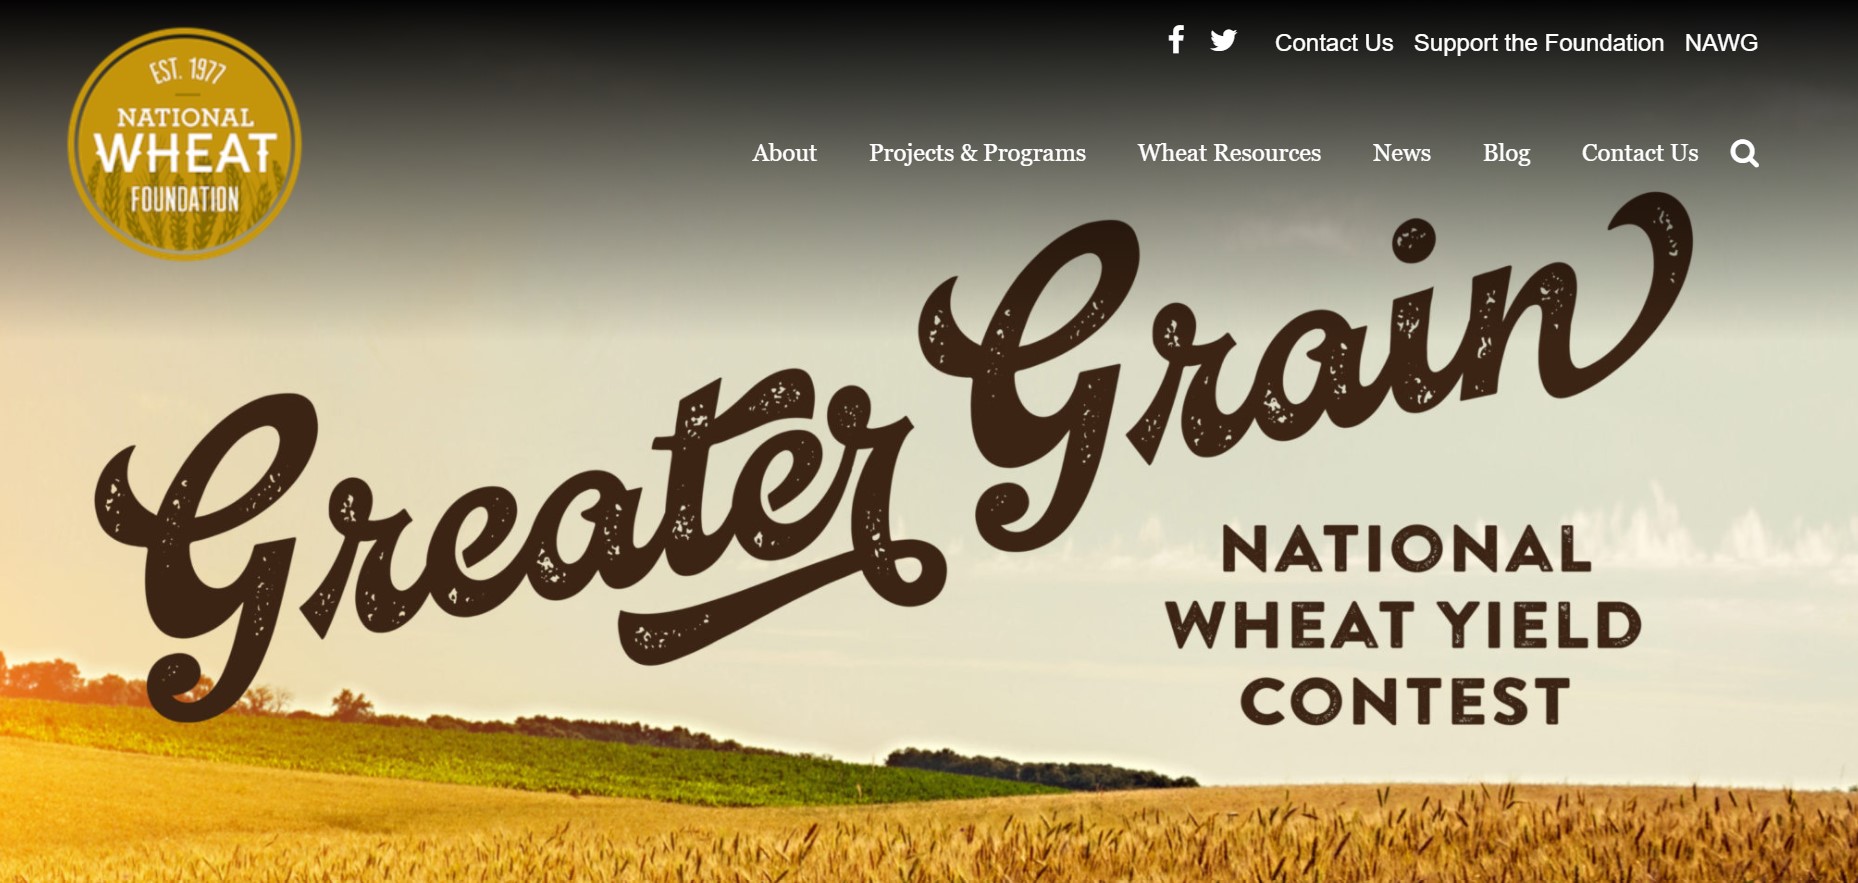 National Wheat Yield Contest promotional image